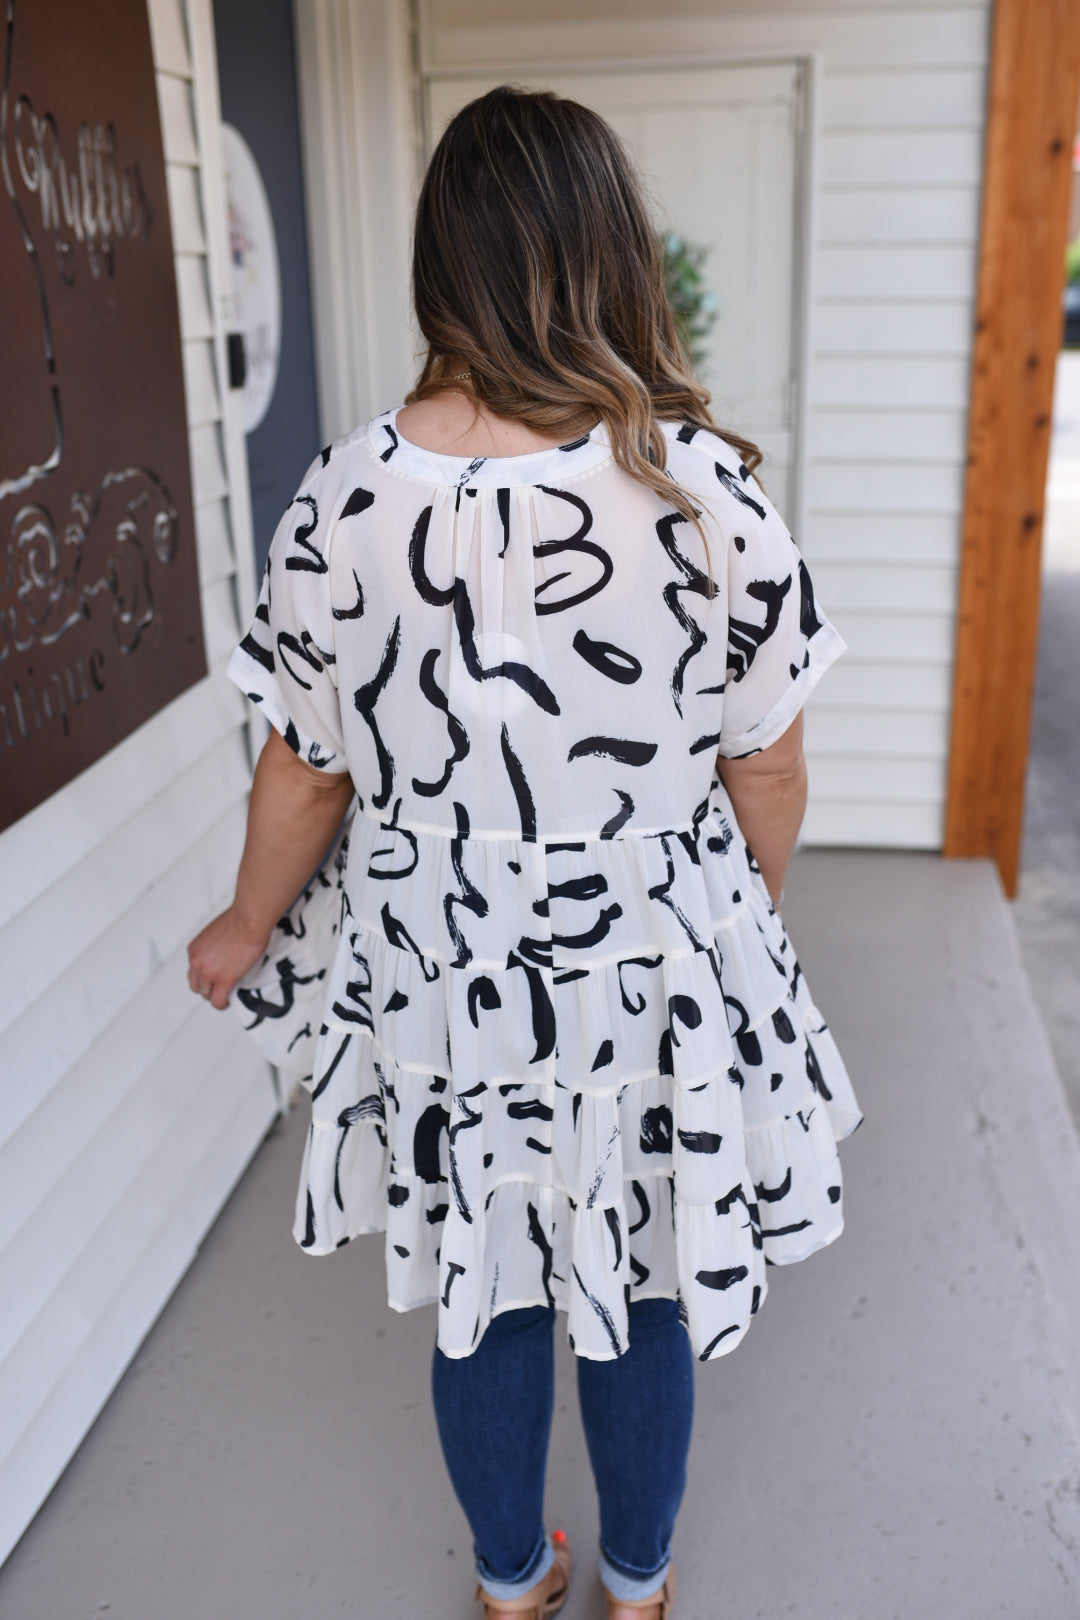 Just Swirly Abstract Print Tunic Top